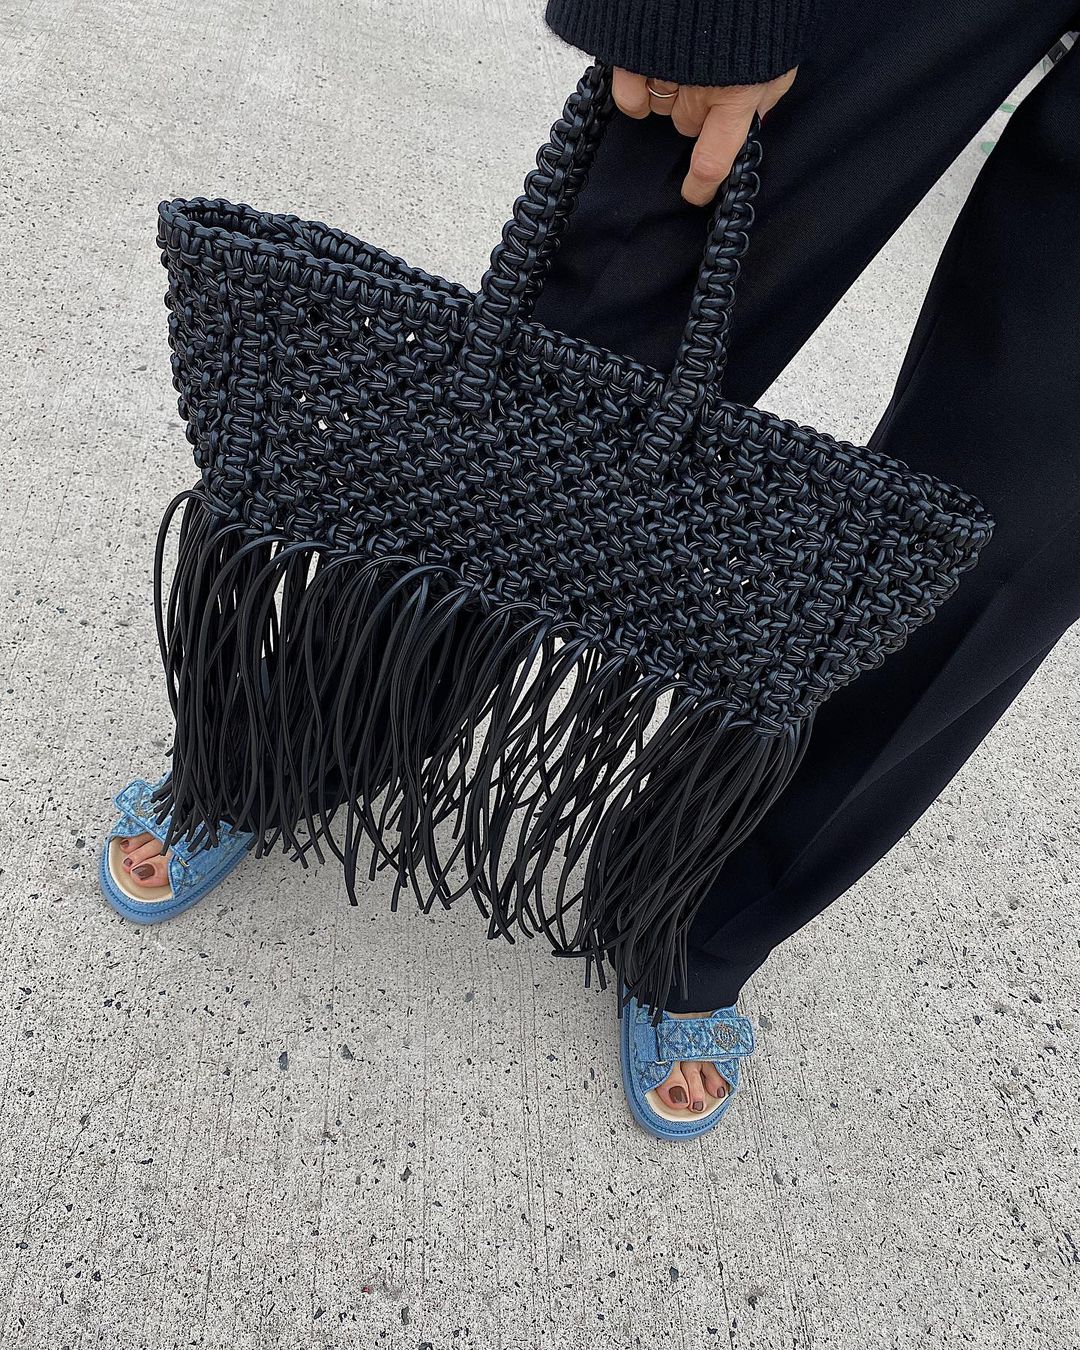 The 34 Best Fringe Bags at Every Price Point | Who What Wear